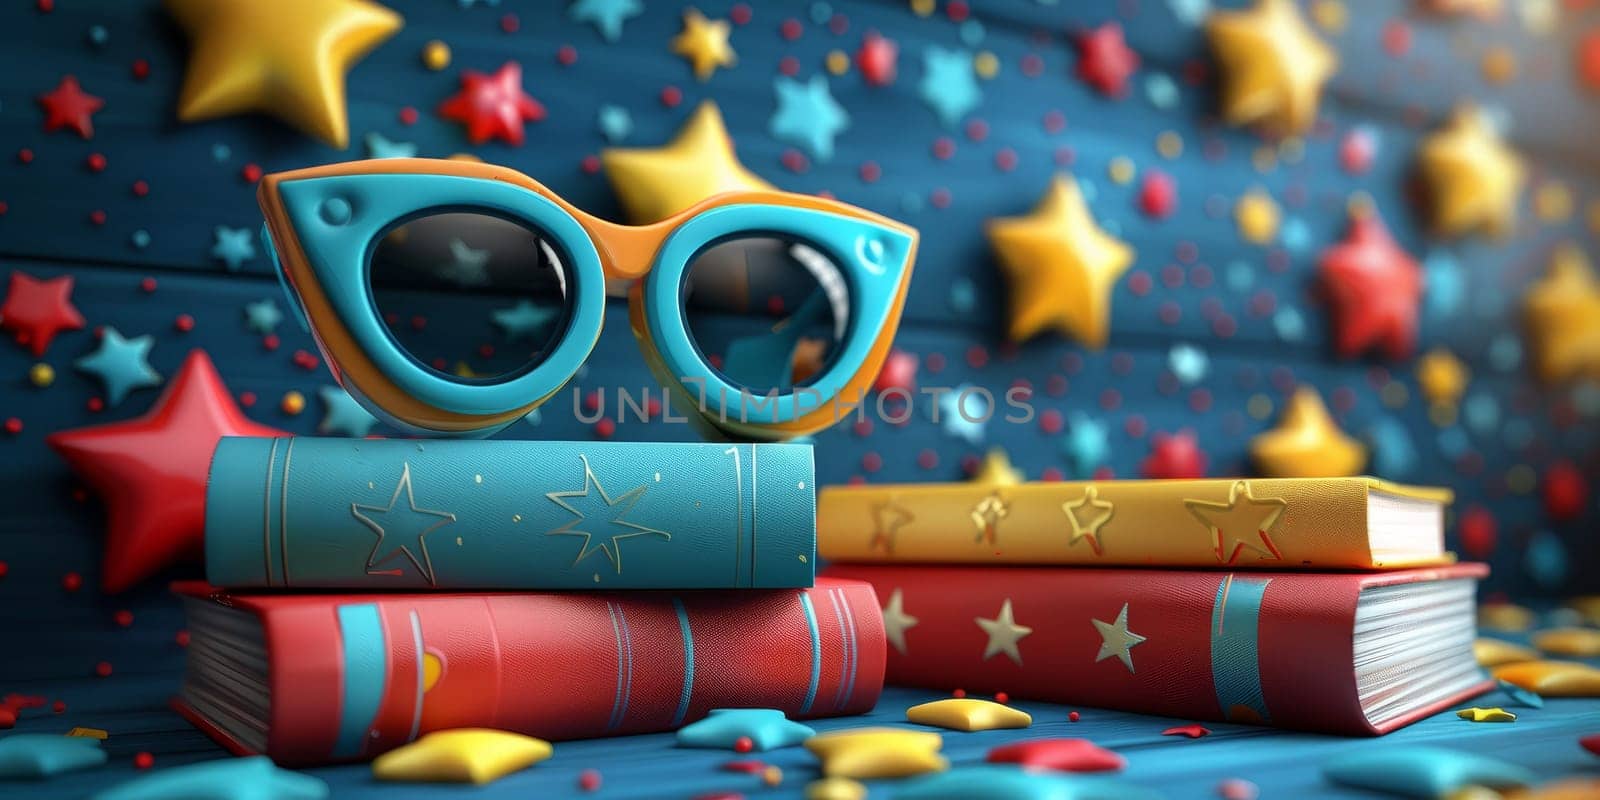 Fun and Whimsical Reading Glasses with Stacked Books on Colorful Star Background. Concept of Imagination, Creativity, and Escapism through Literature.